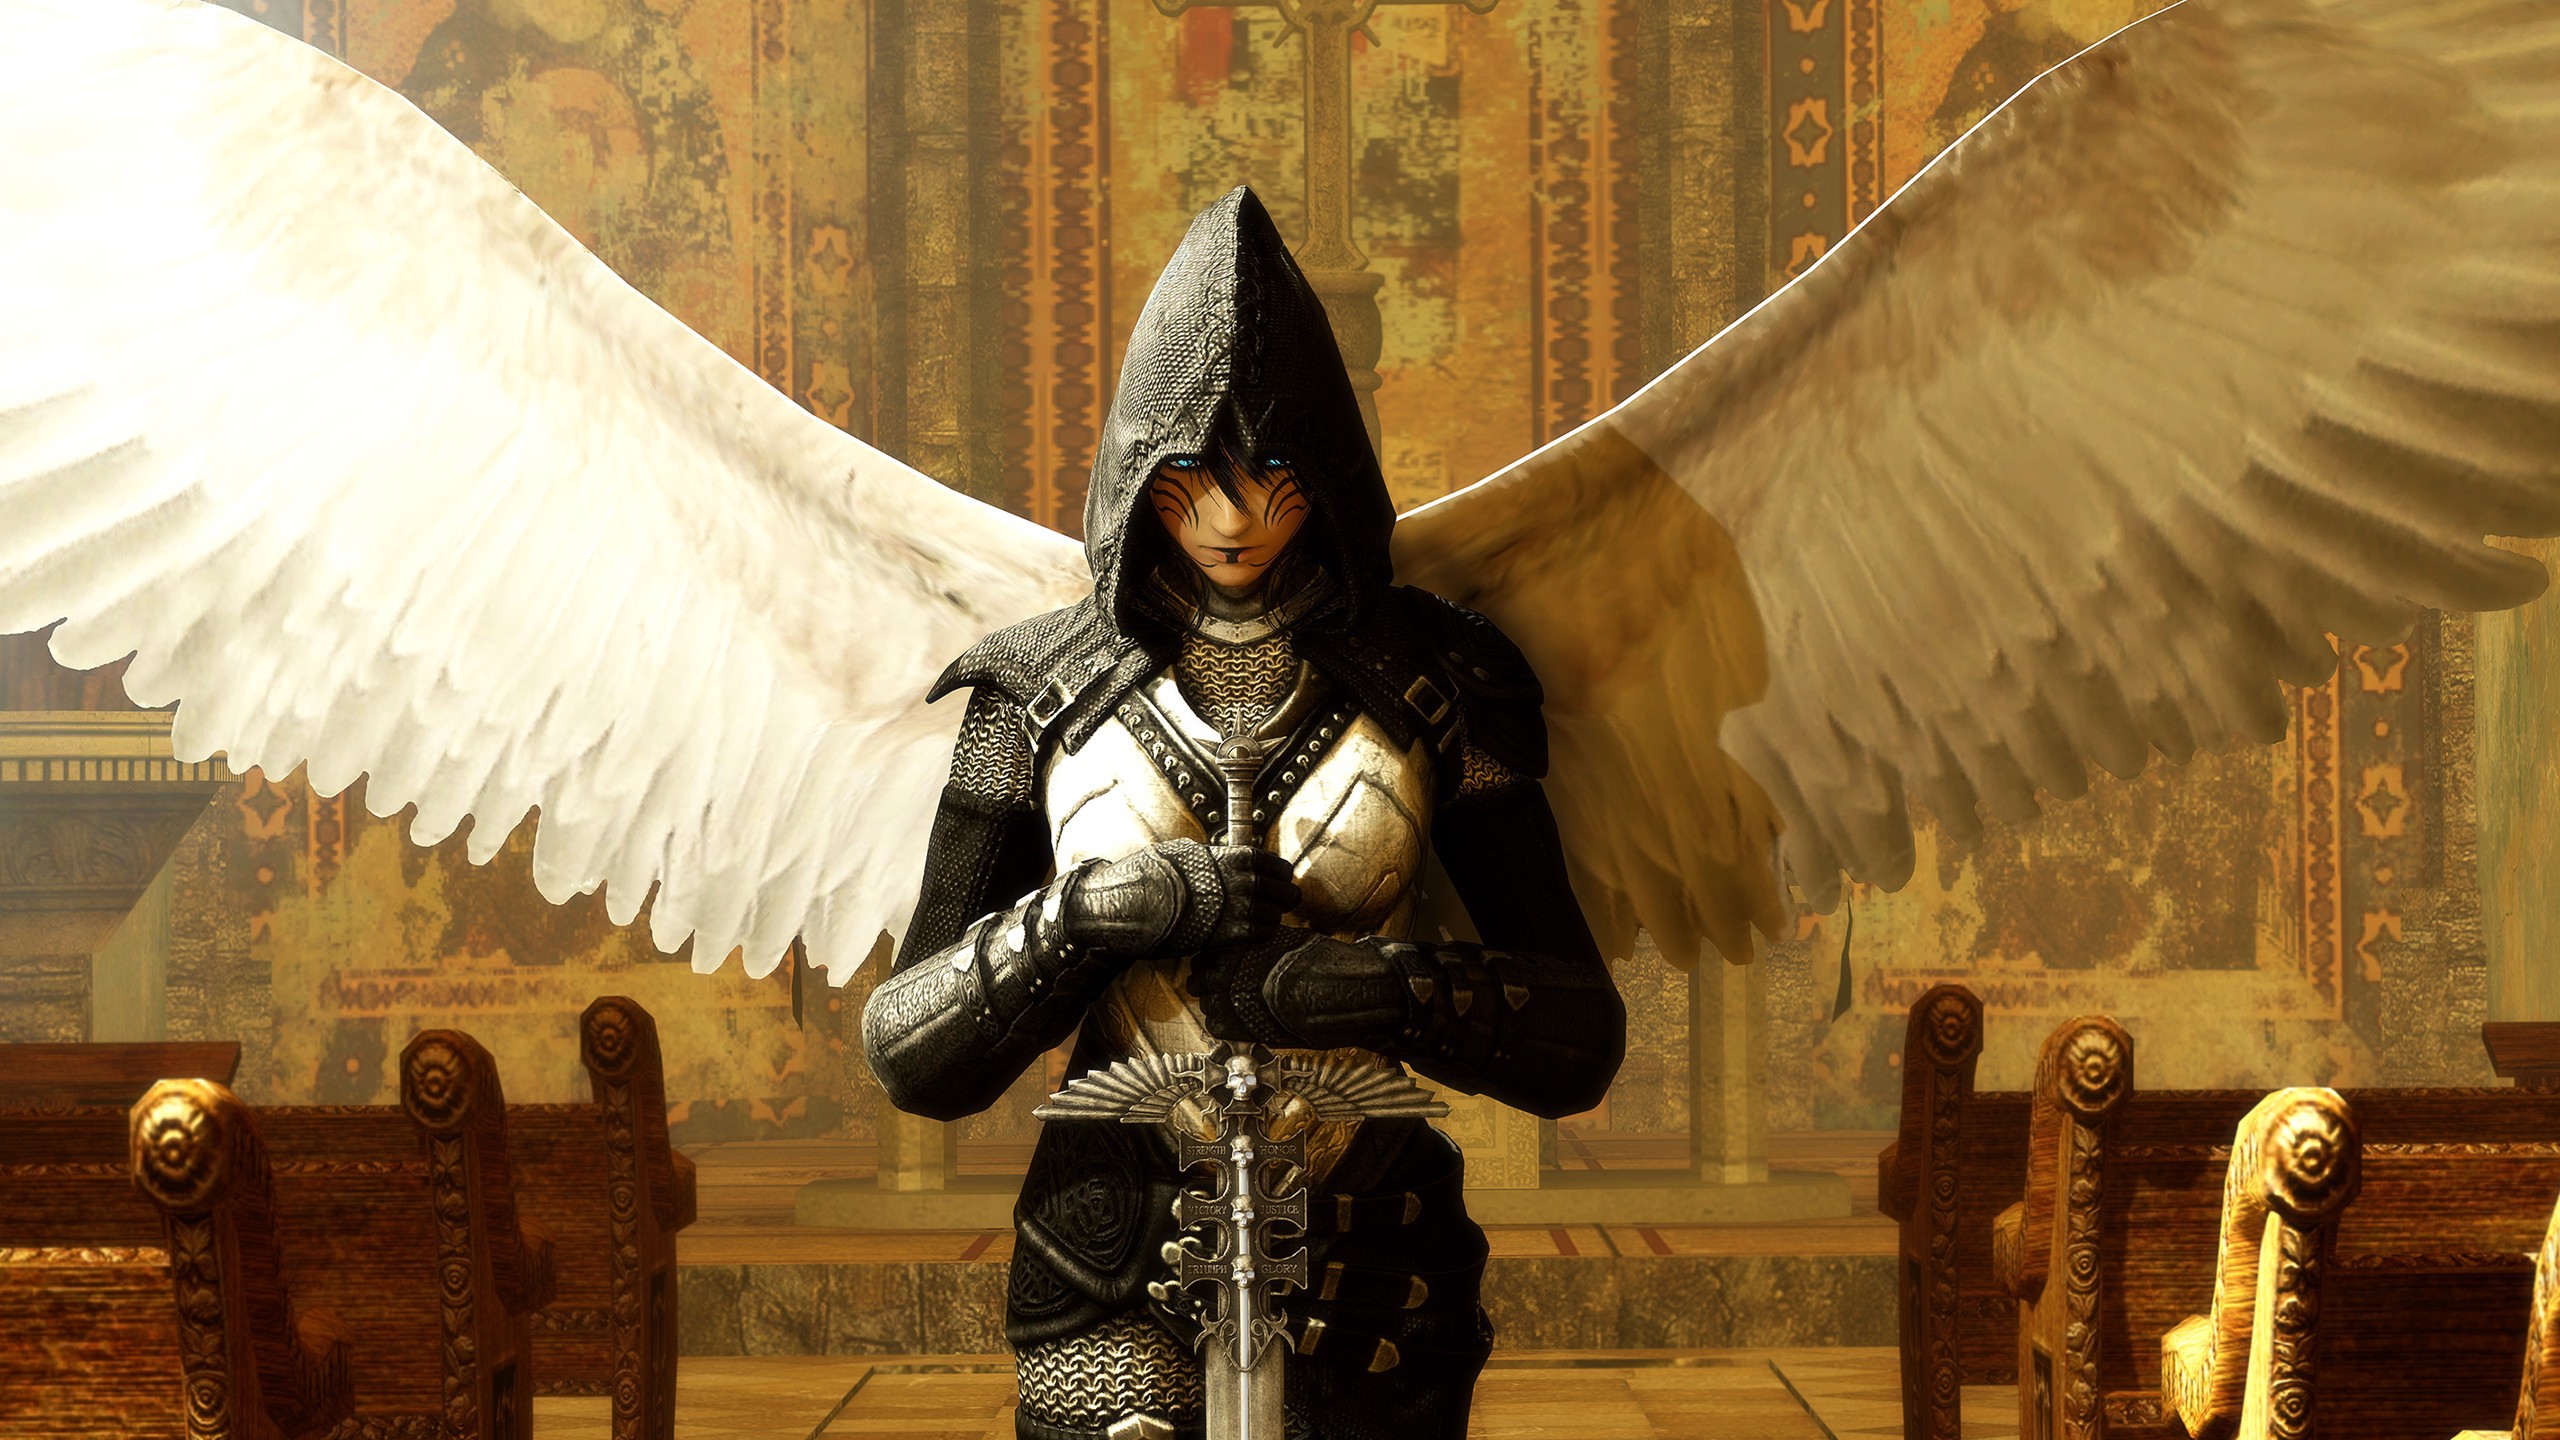 Angel In Armor With A Sword Wallpaper And Image